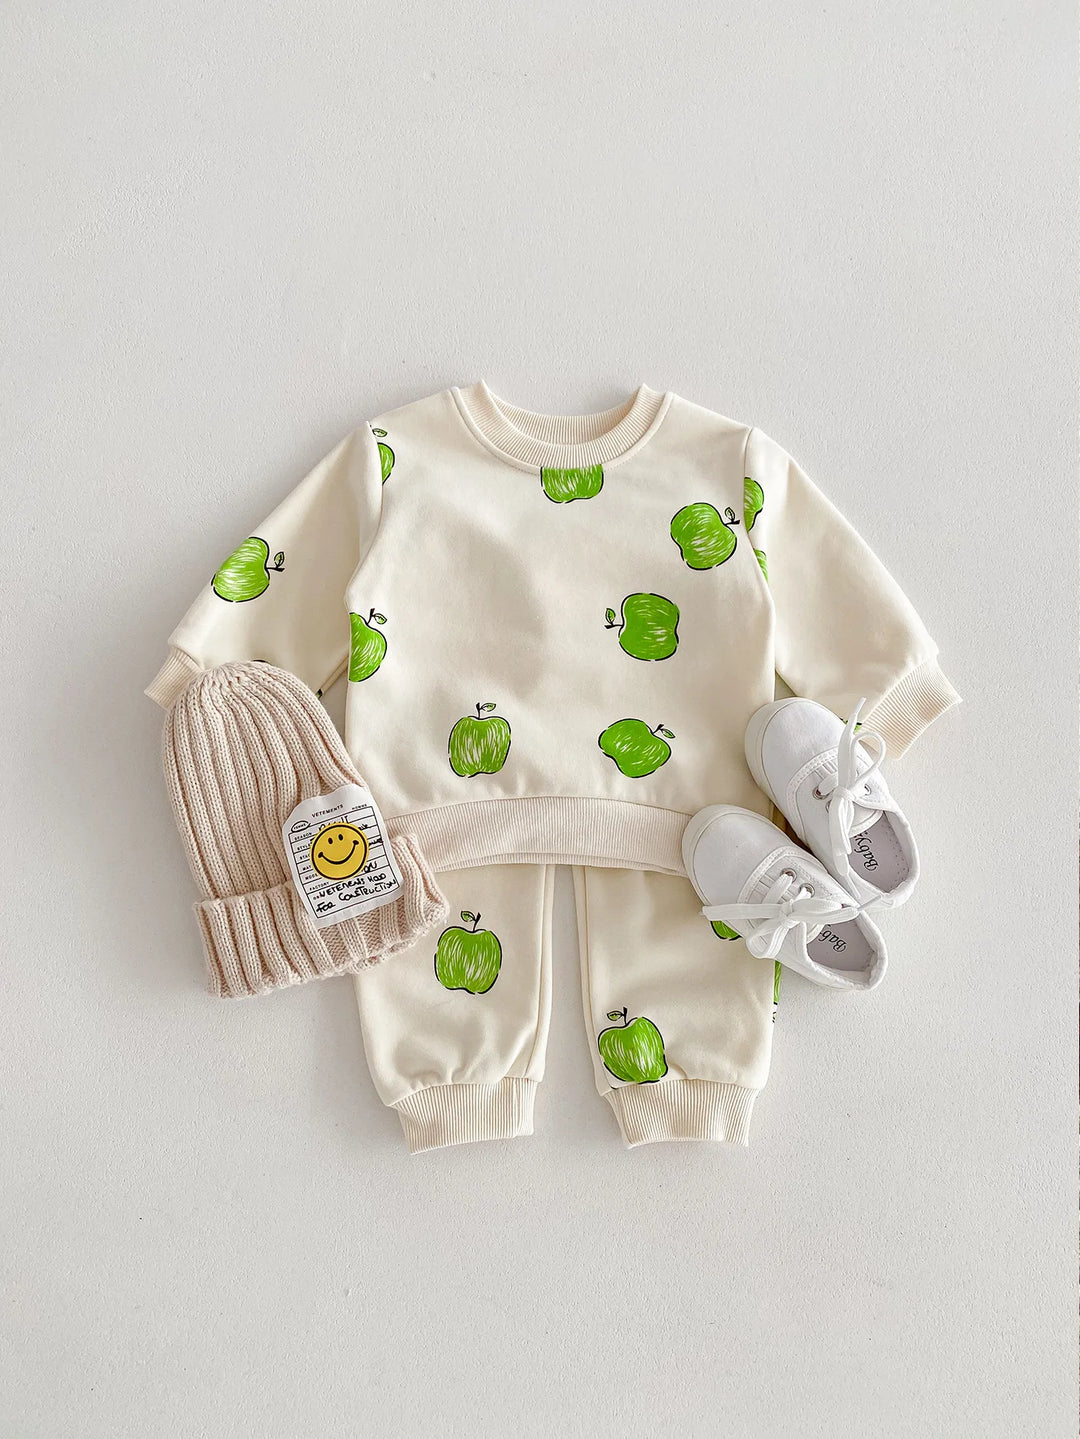 2024 Spring Collection: Green Apple Print Long Sleeve Set for Babies & Toddlers - Unisex 2pc Outfit"